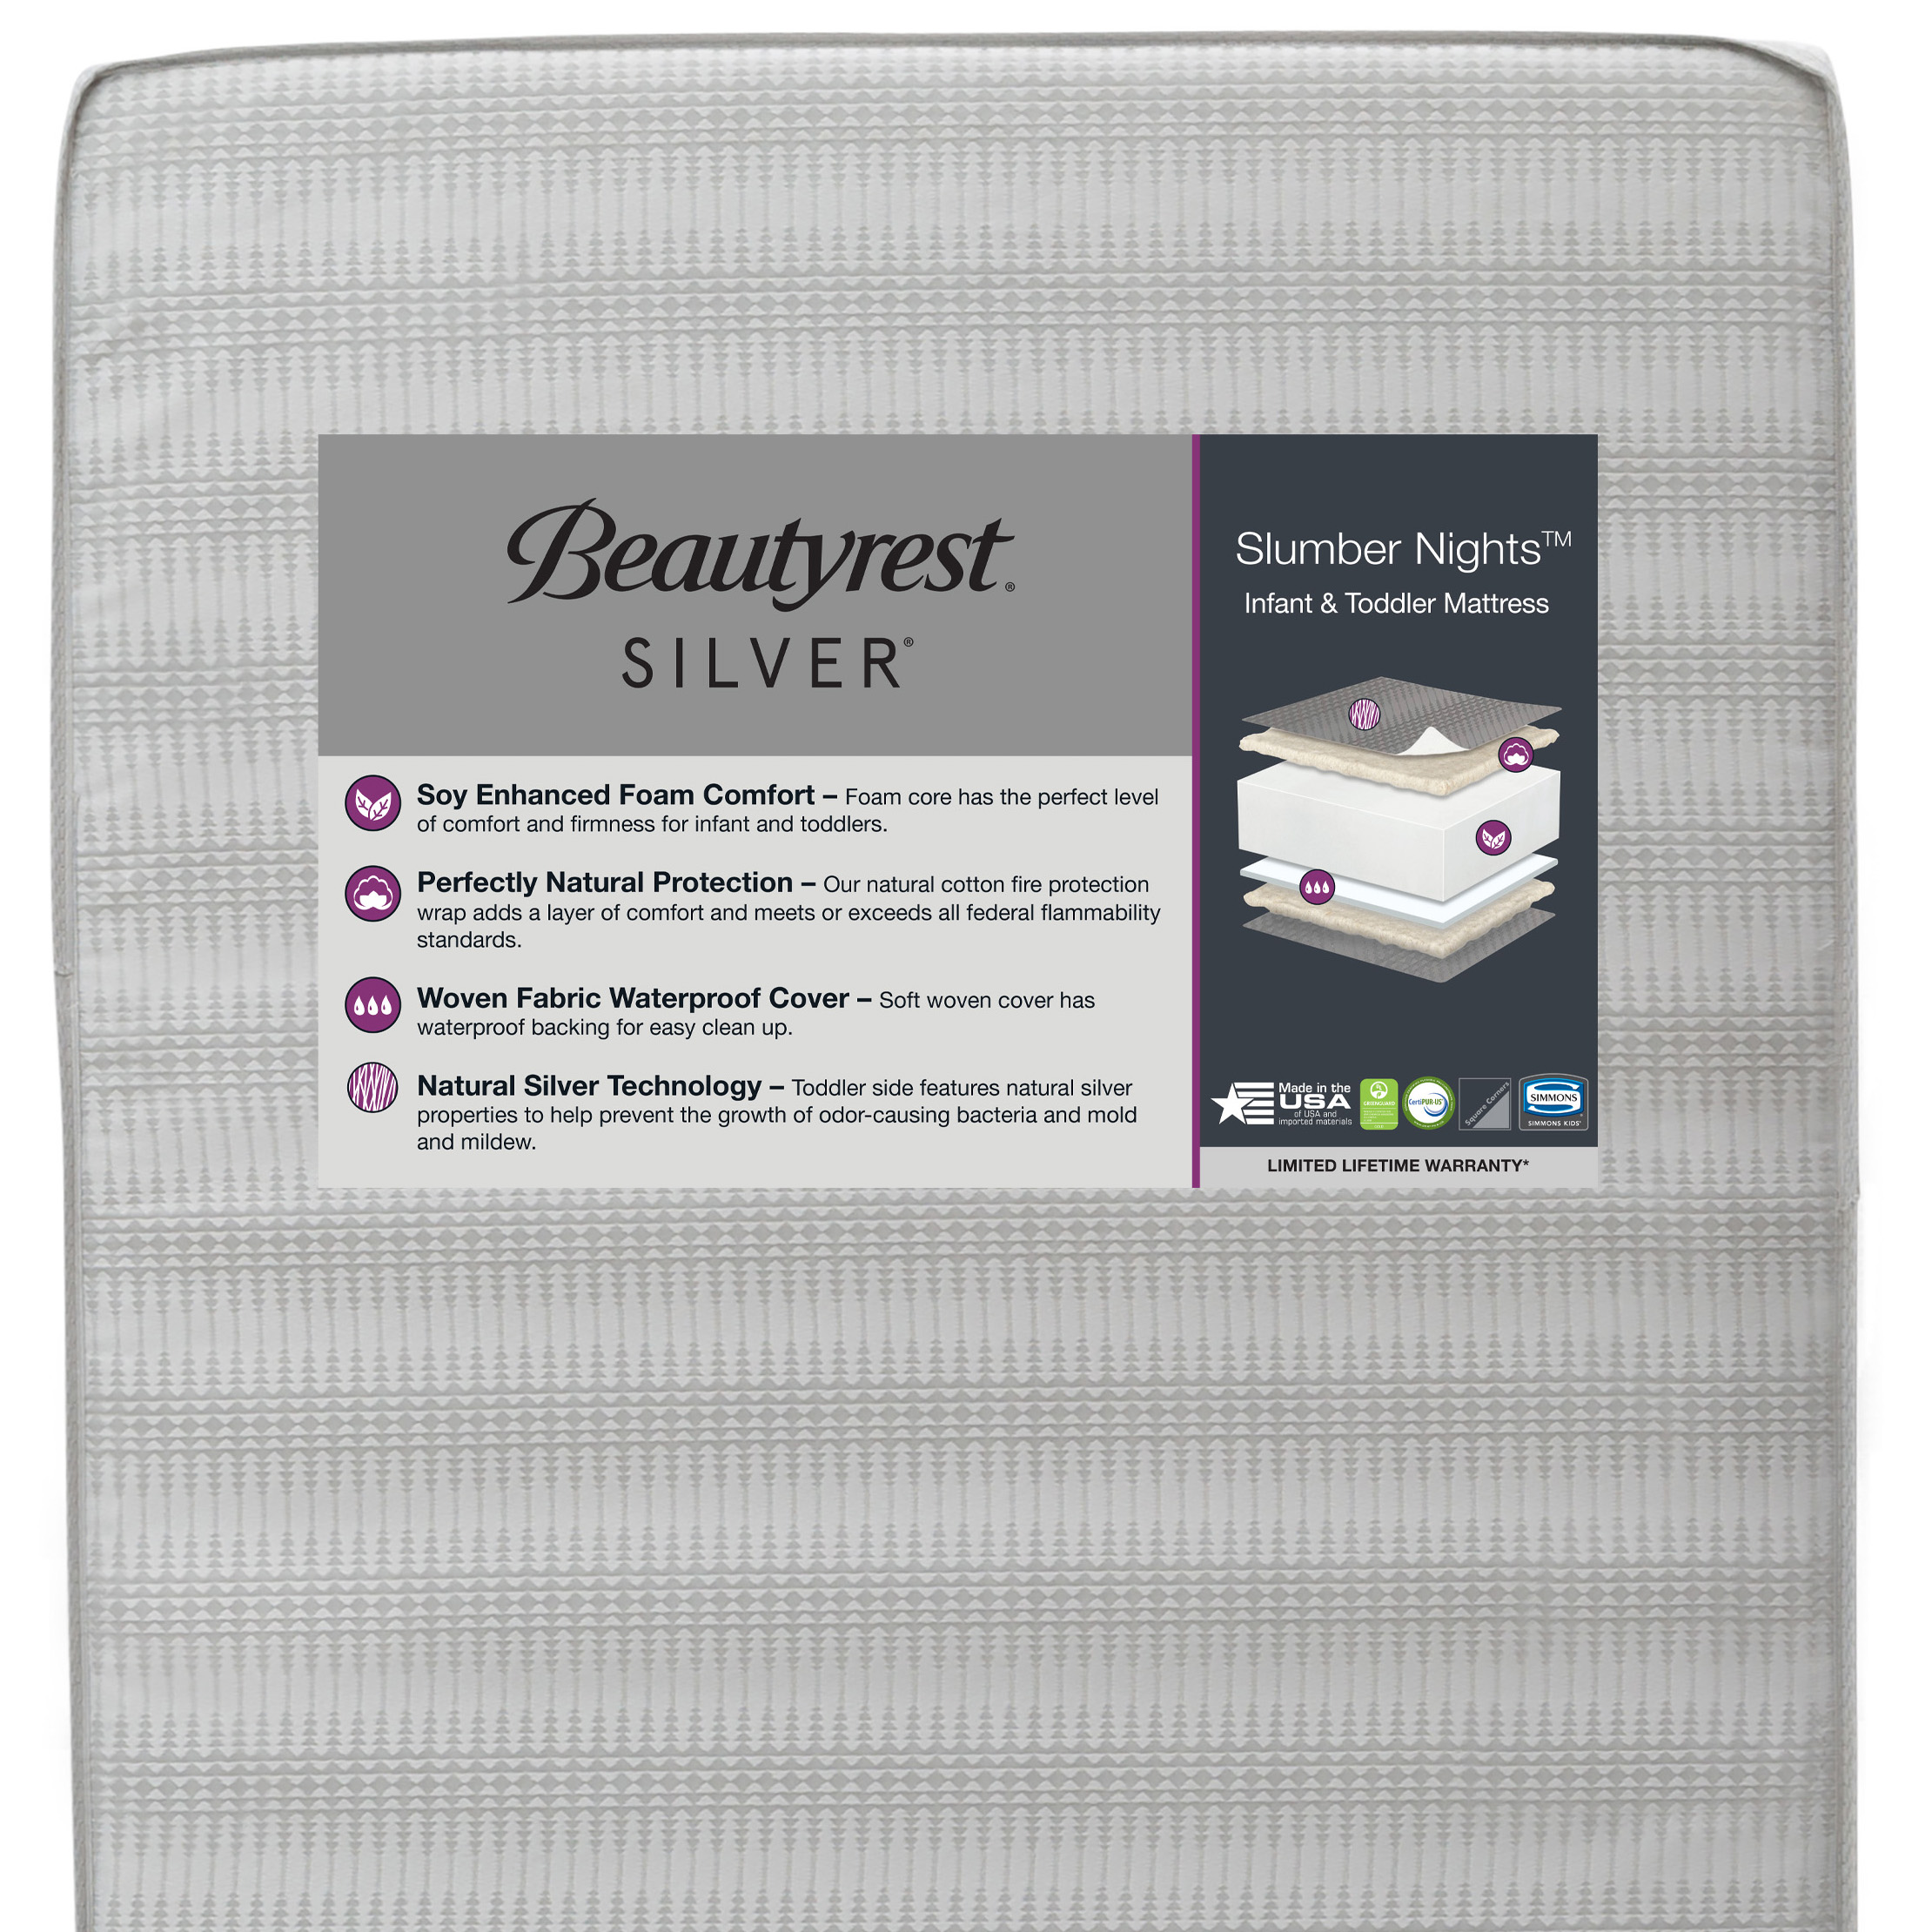 Beautyrest Silver Slumber Nights 2-Stage Antimicrobial Crib & Toddler Mattress, Soy Foam Core - image 1 of 10